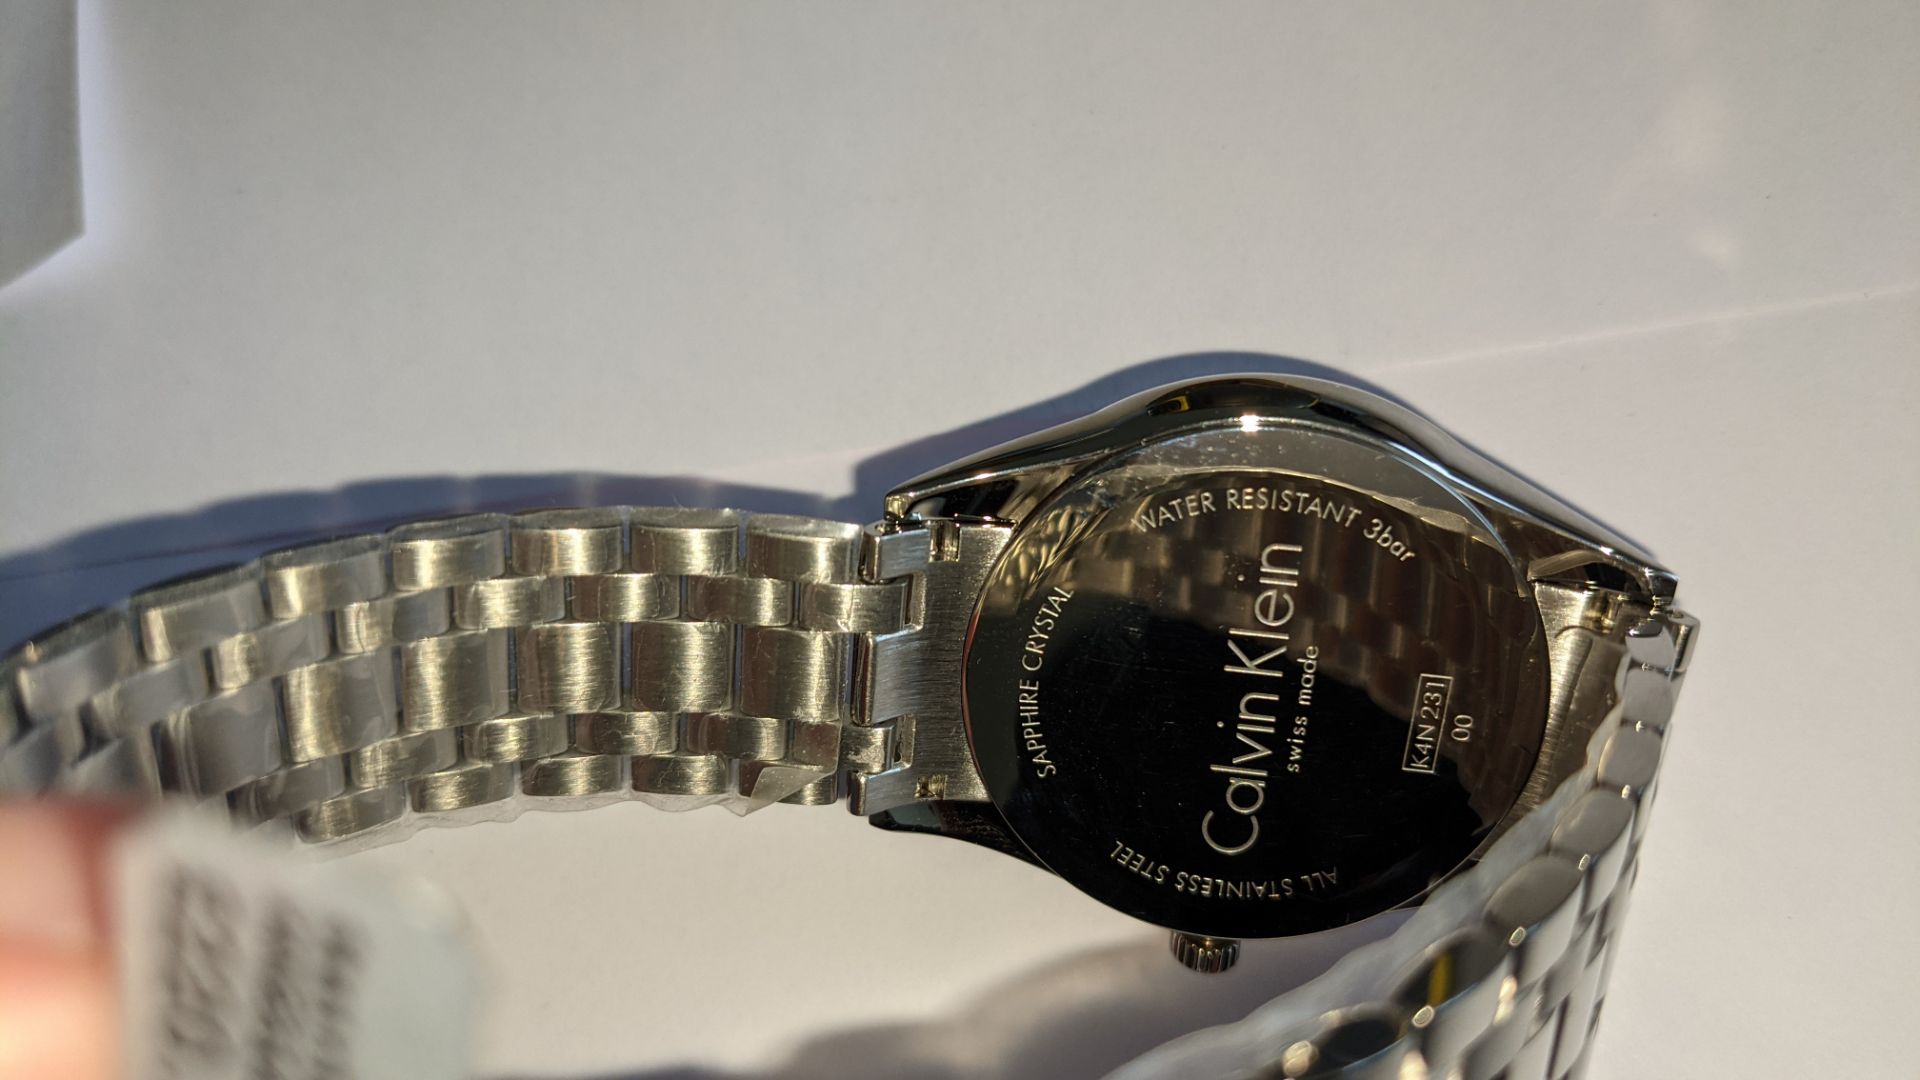 Calvin Klein gent's watch in stainless steel with sapphire crystal face, water resistant 3 bar, prod - Image 13 of 17